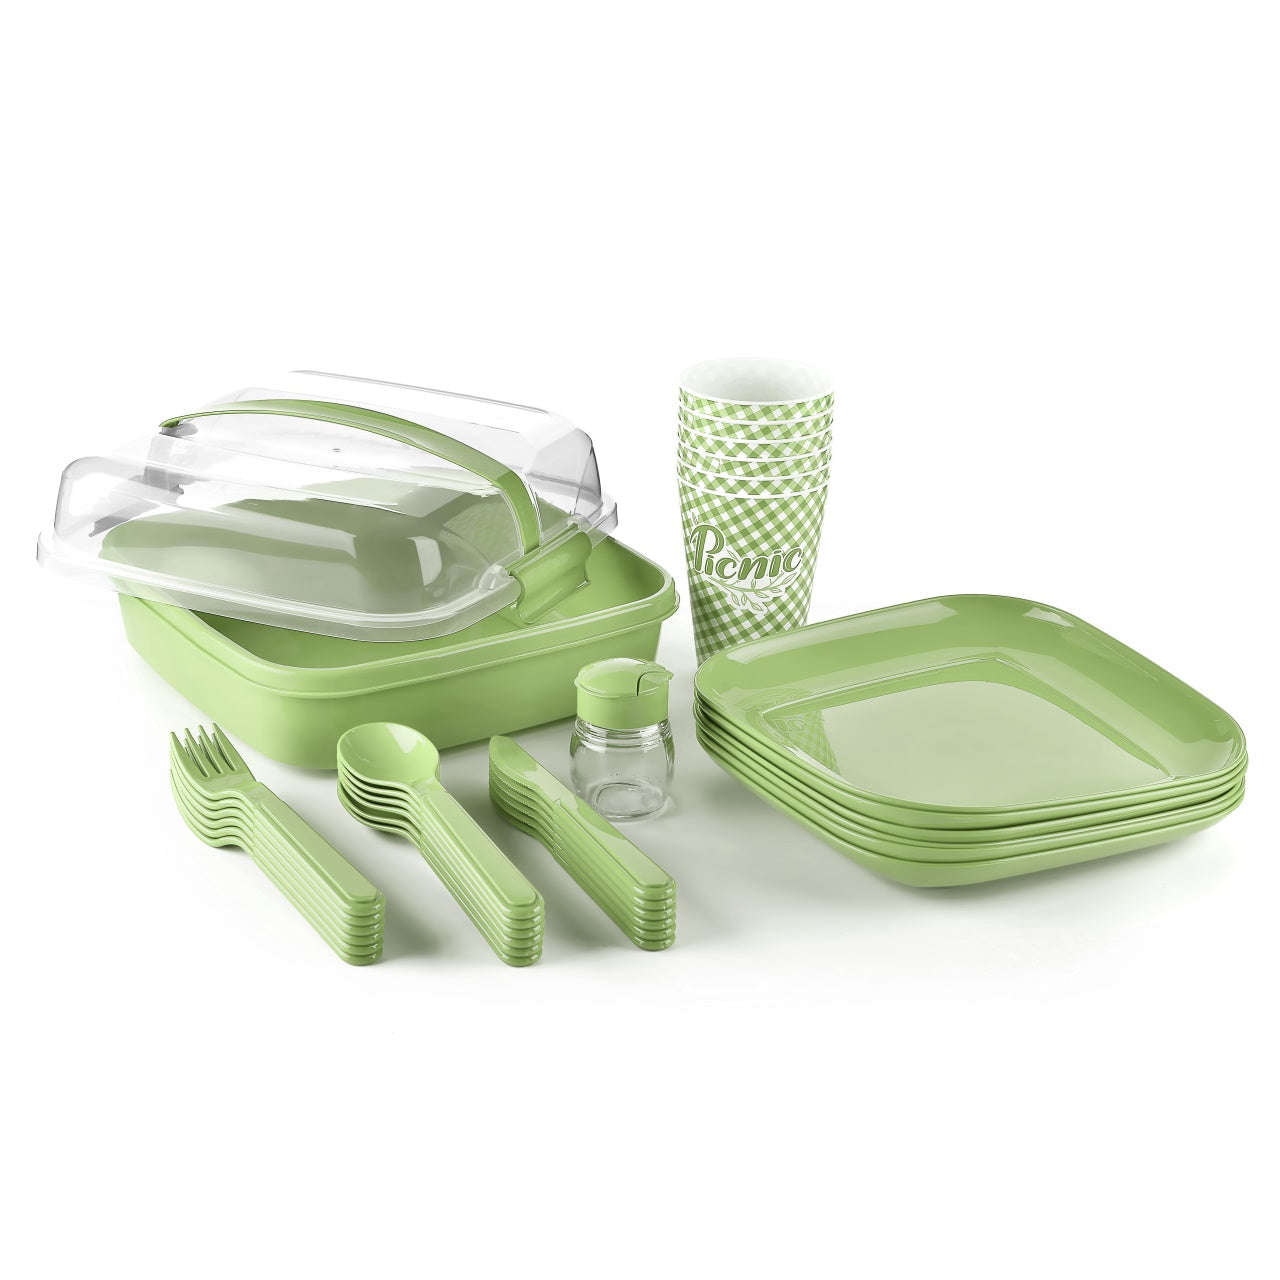 Tupperware Picnic Set Insulated Bag  Plates-Bowls-Cups-Pitcher-Utensils-Green-NEW